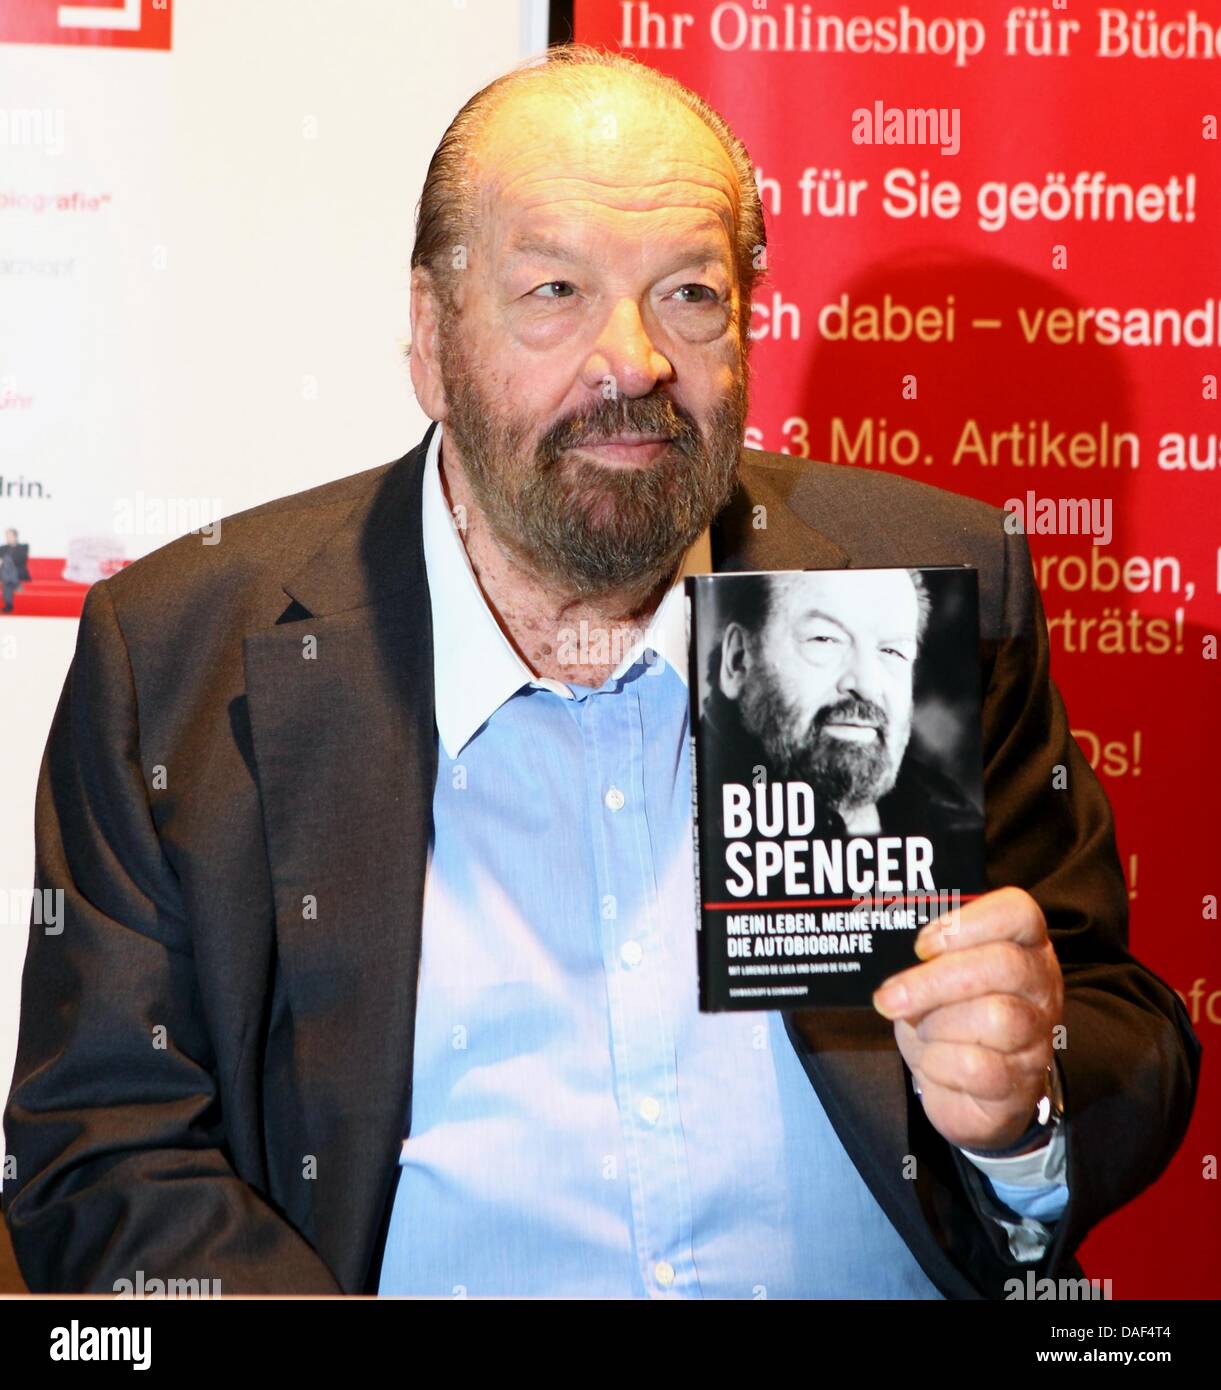 Italian actor Bud Spencer attends a autograph session for the